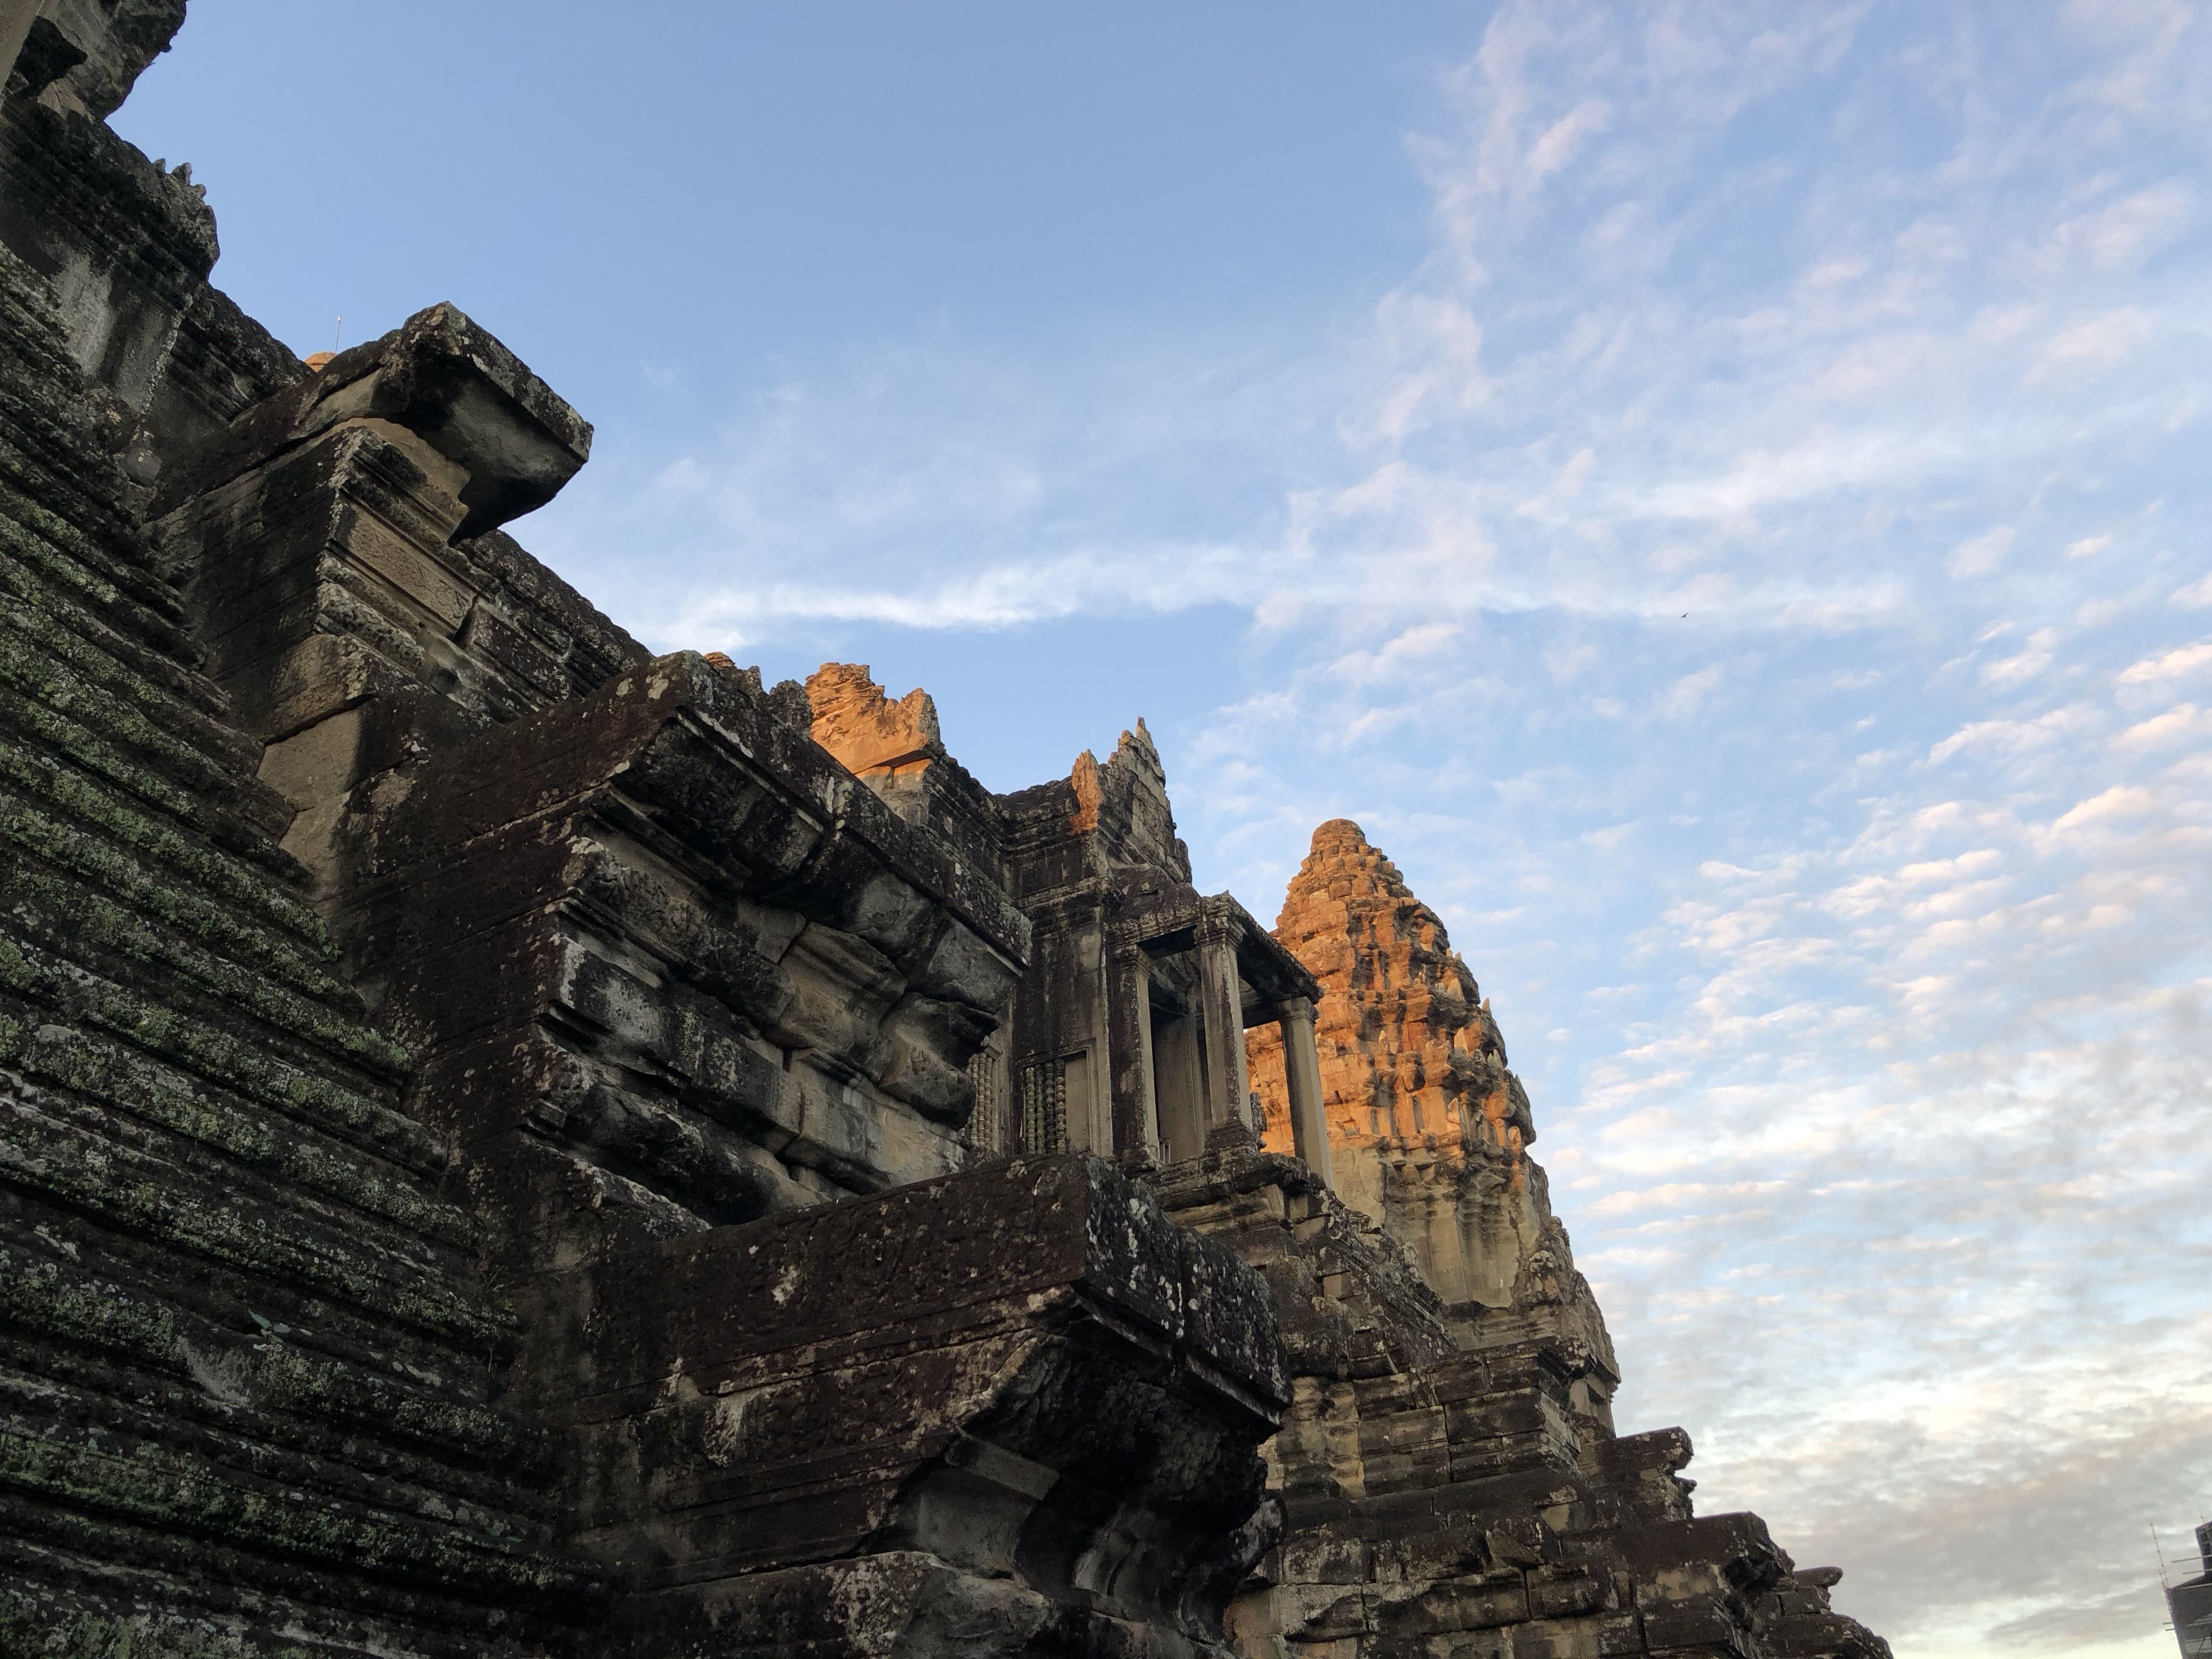 A corner of Angkor Wat, with its carved balconies in shadow. Behind them the tower is lit yellow by the early morning sunlight.